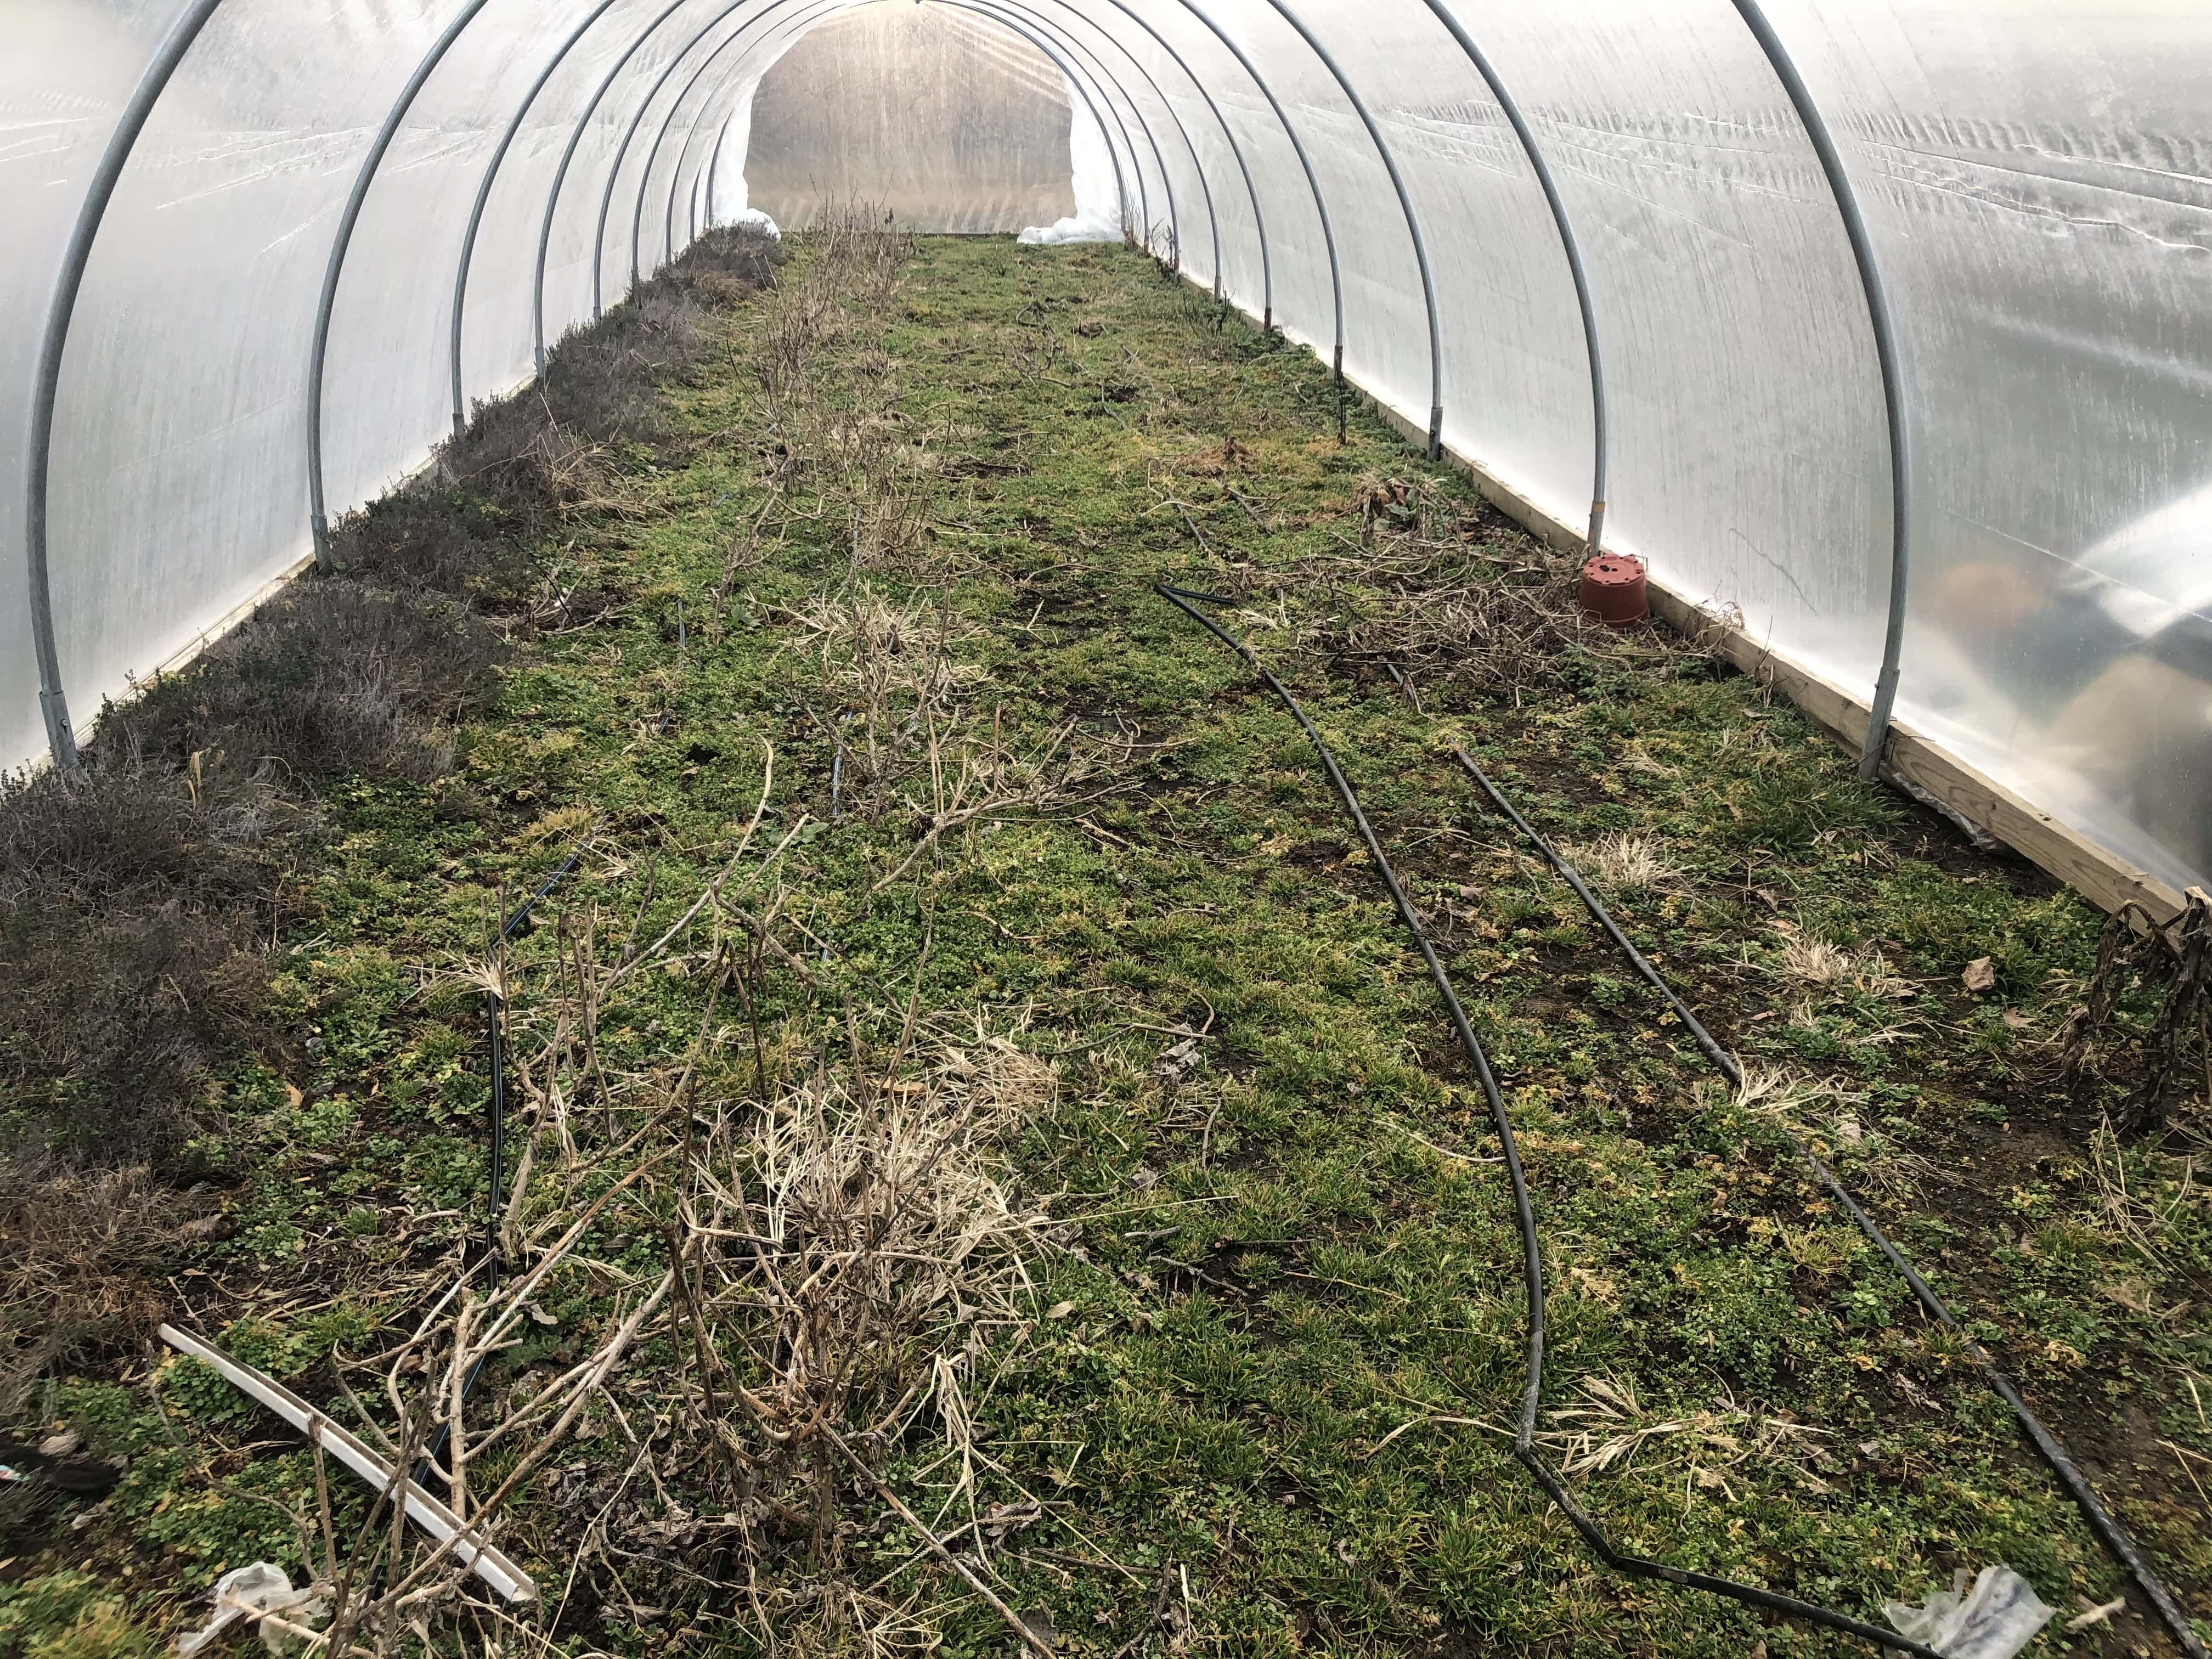 looking short grassy ground inside of a tunnel - 8' tall hoops cover in plastic.